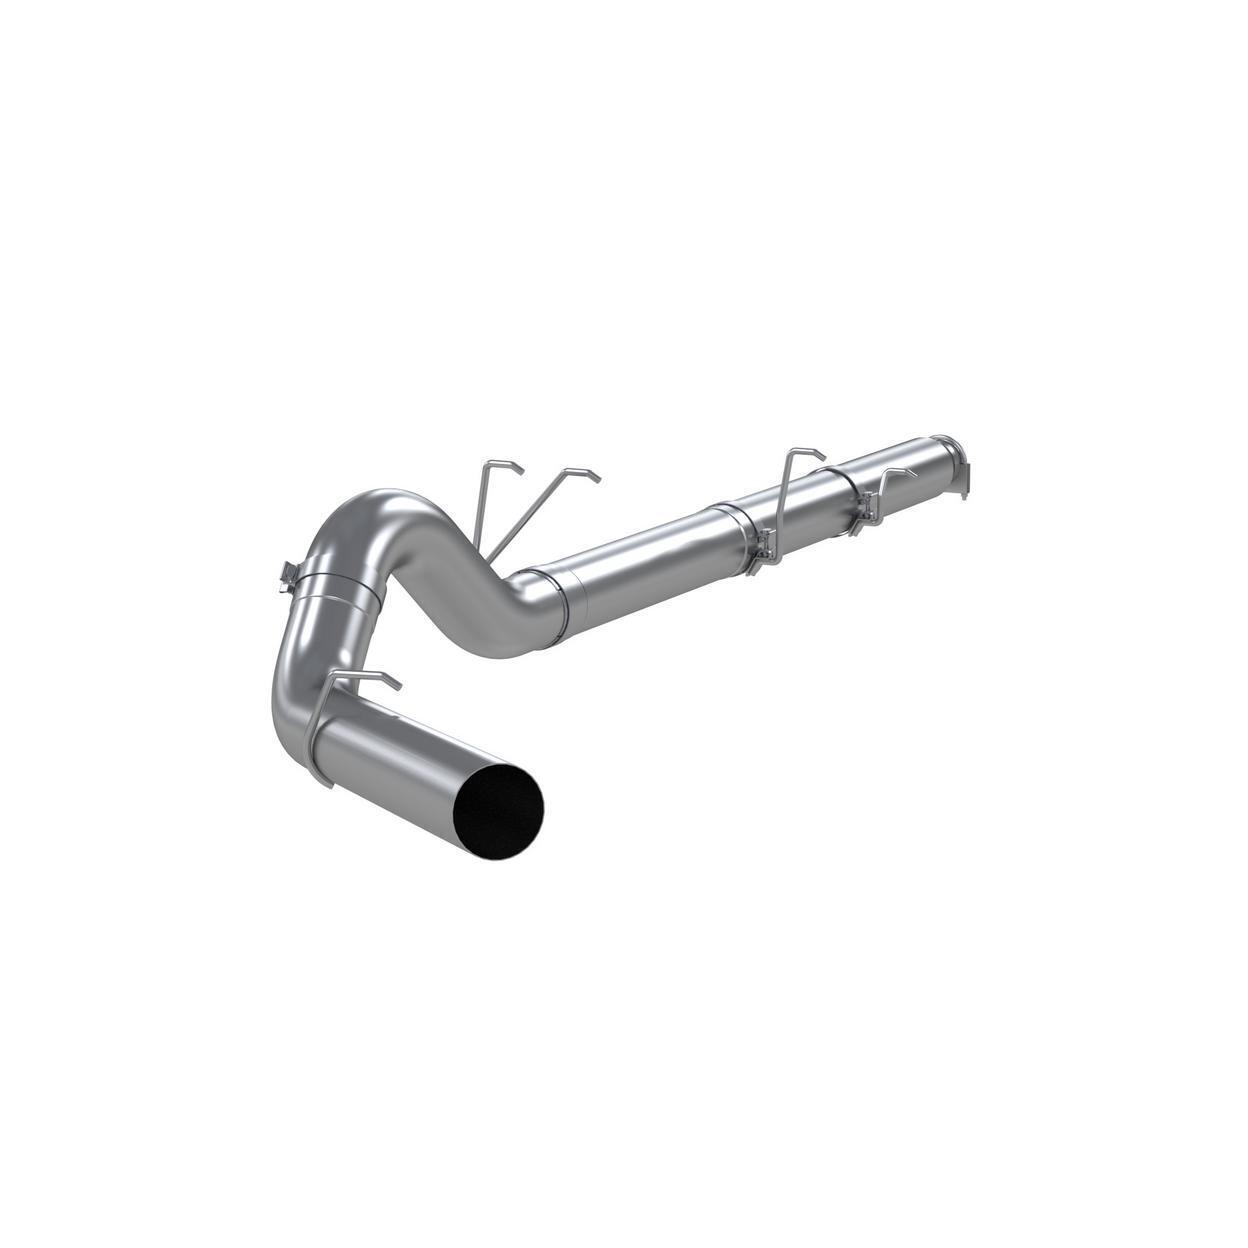 Exhaust System Kit for 2006-2007 Ford F-250 Super Duty